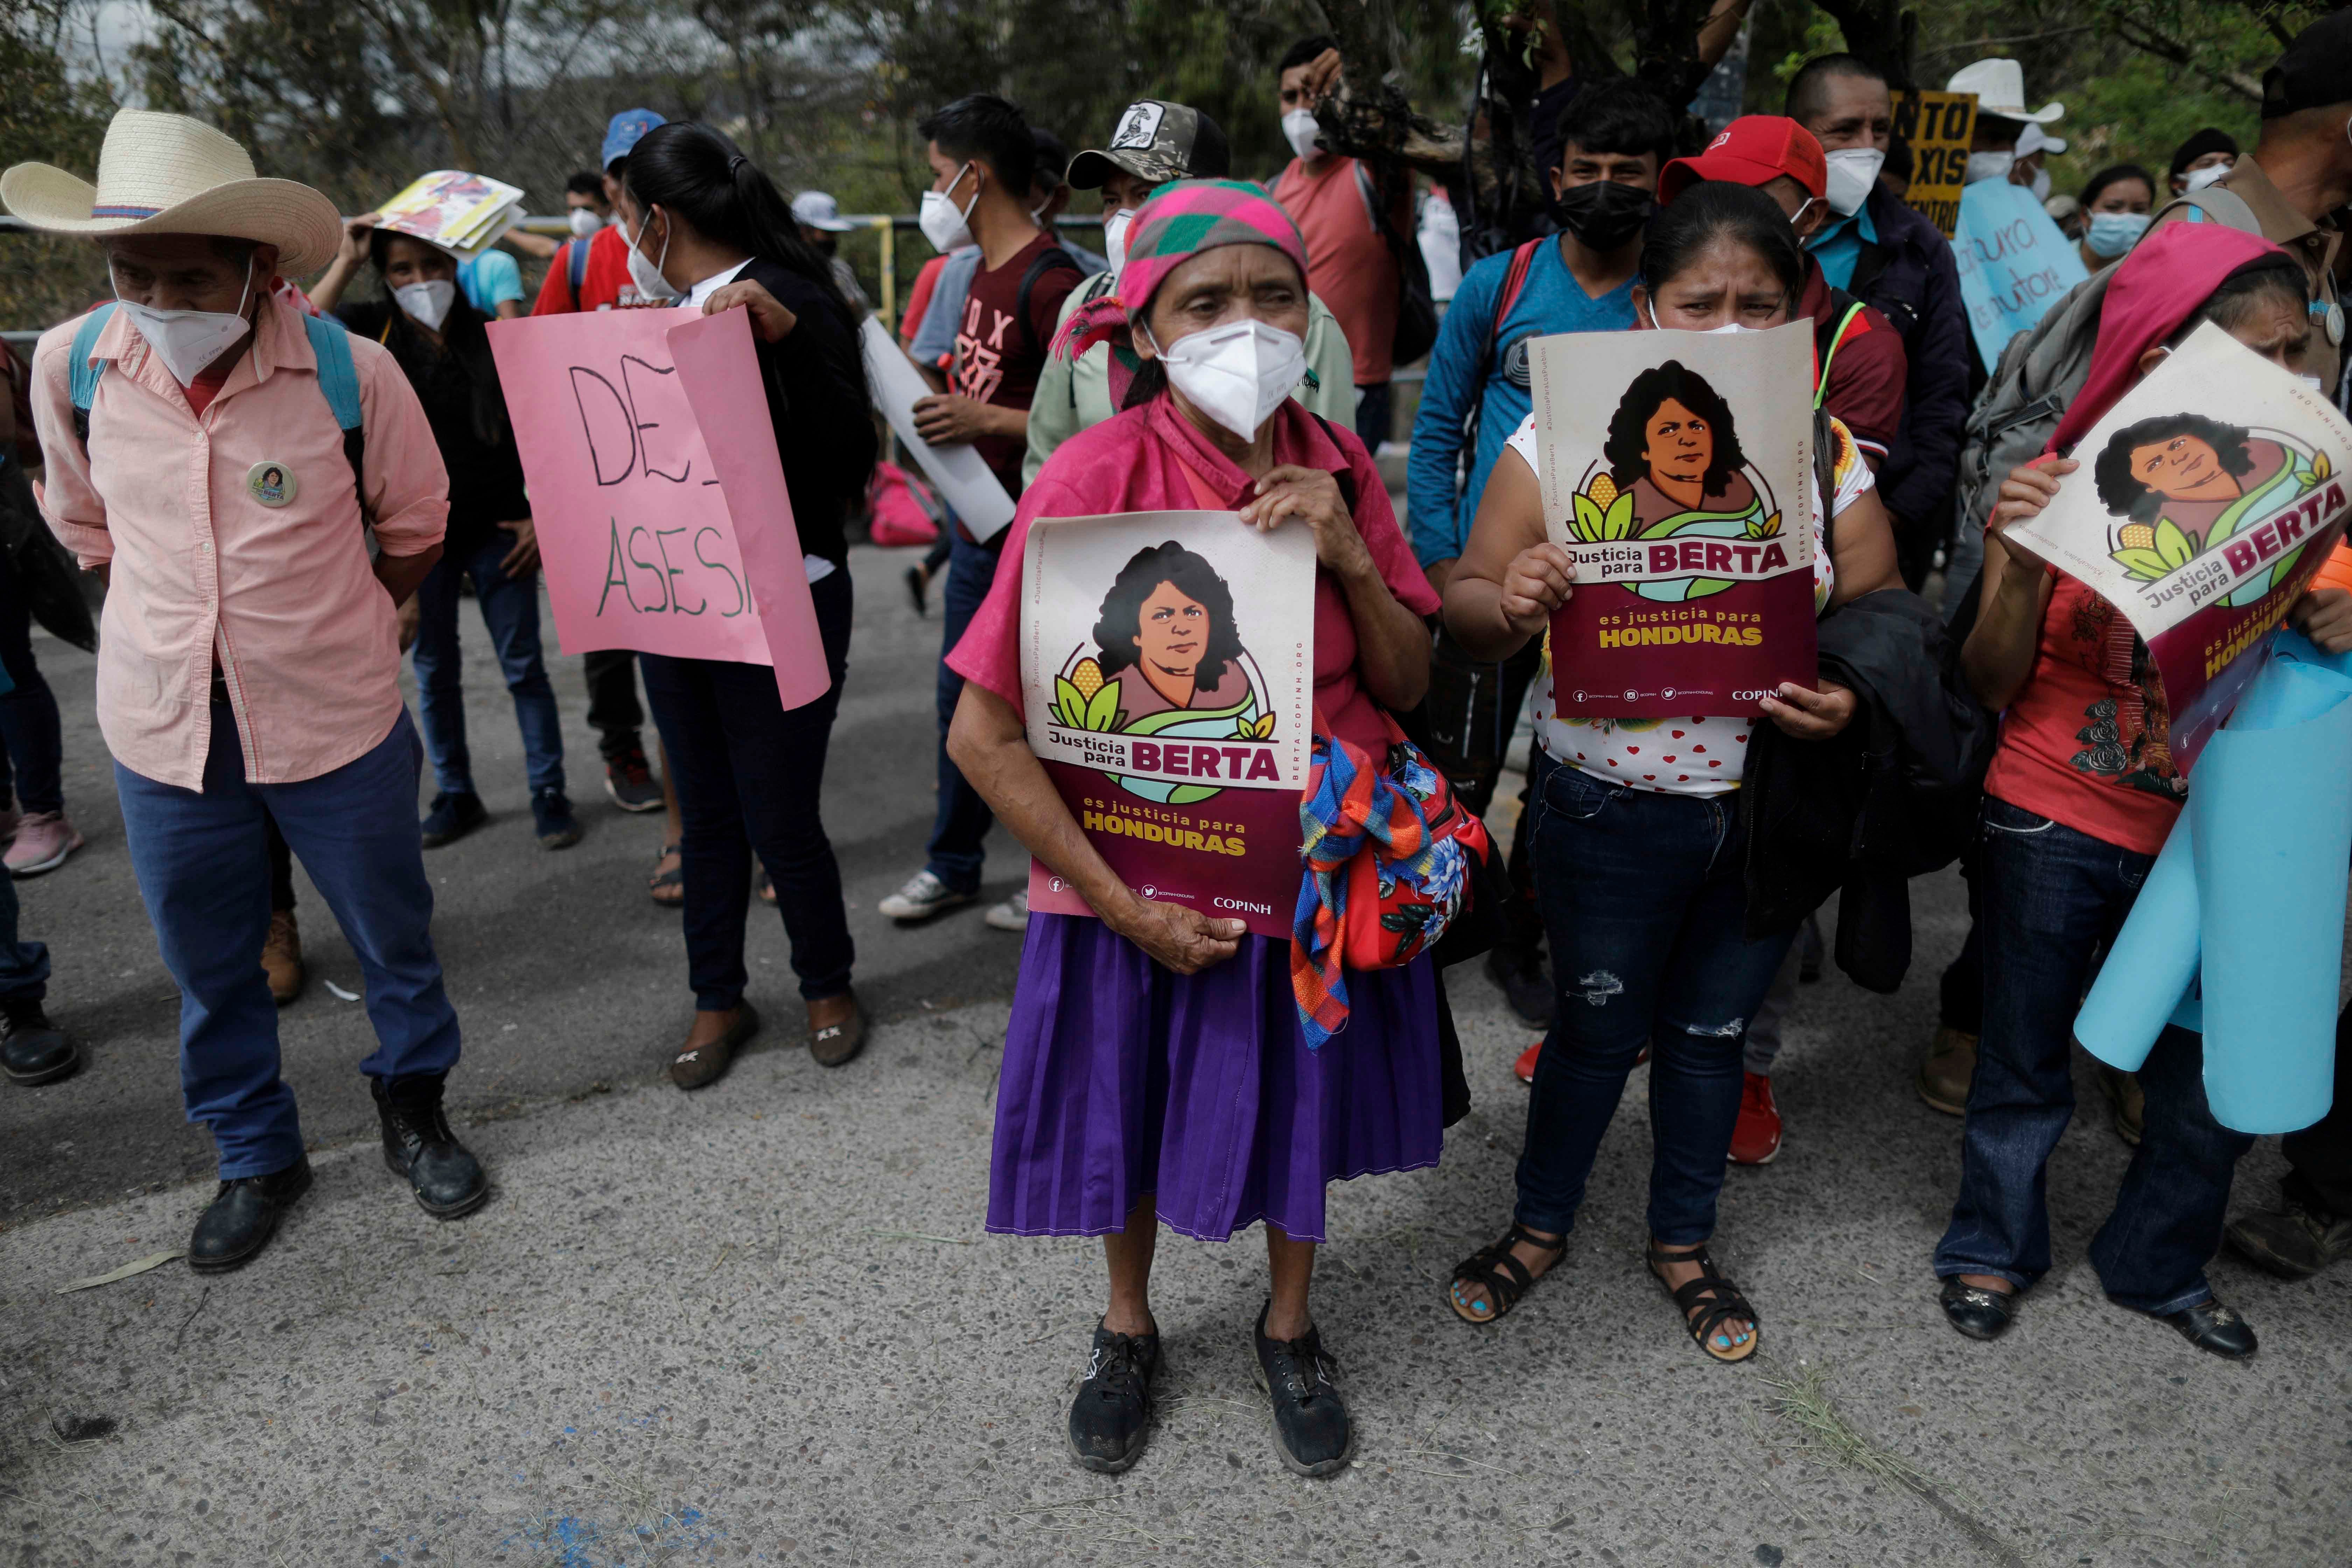 Supporters of Honduran environmental and Indigenous rights activist, Berta Cáceres, hold signs with her name and likeness during the trial of Roberto David Castillo, who was charged with her murder, outside of the Supreme Court building in Tegucigalpa, Honduras, on April 6, 2021. The trial began five years after the prize-winning activist's murder.